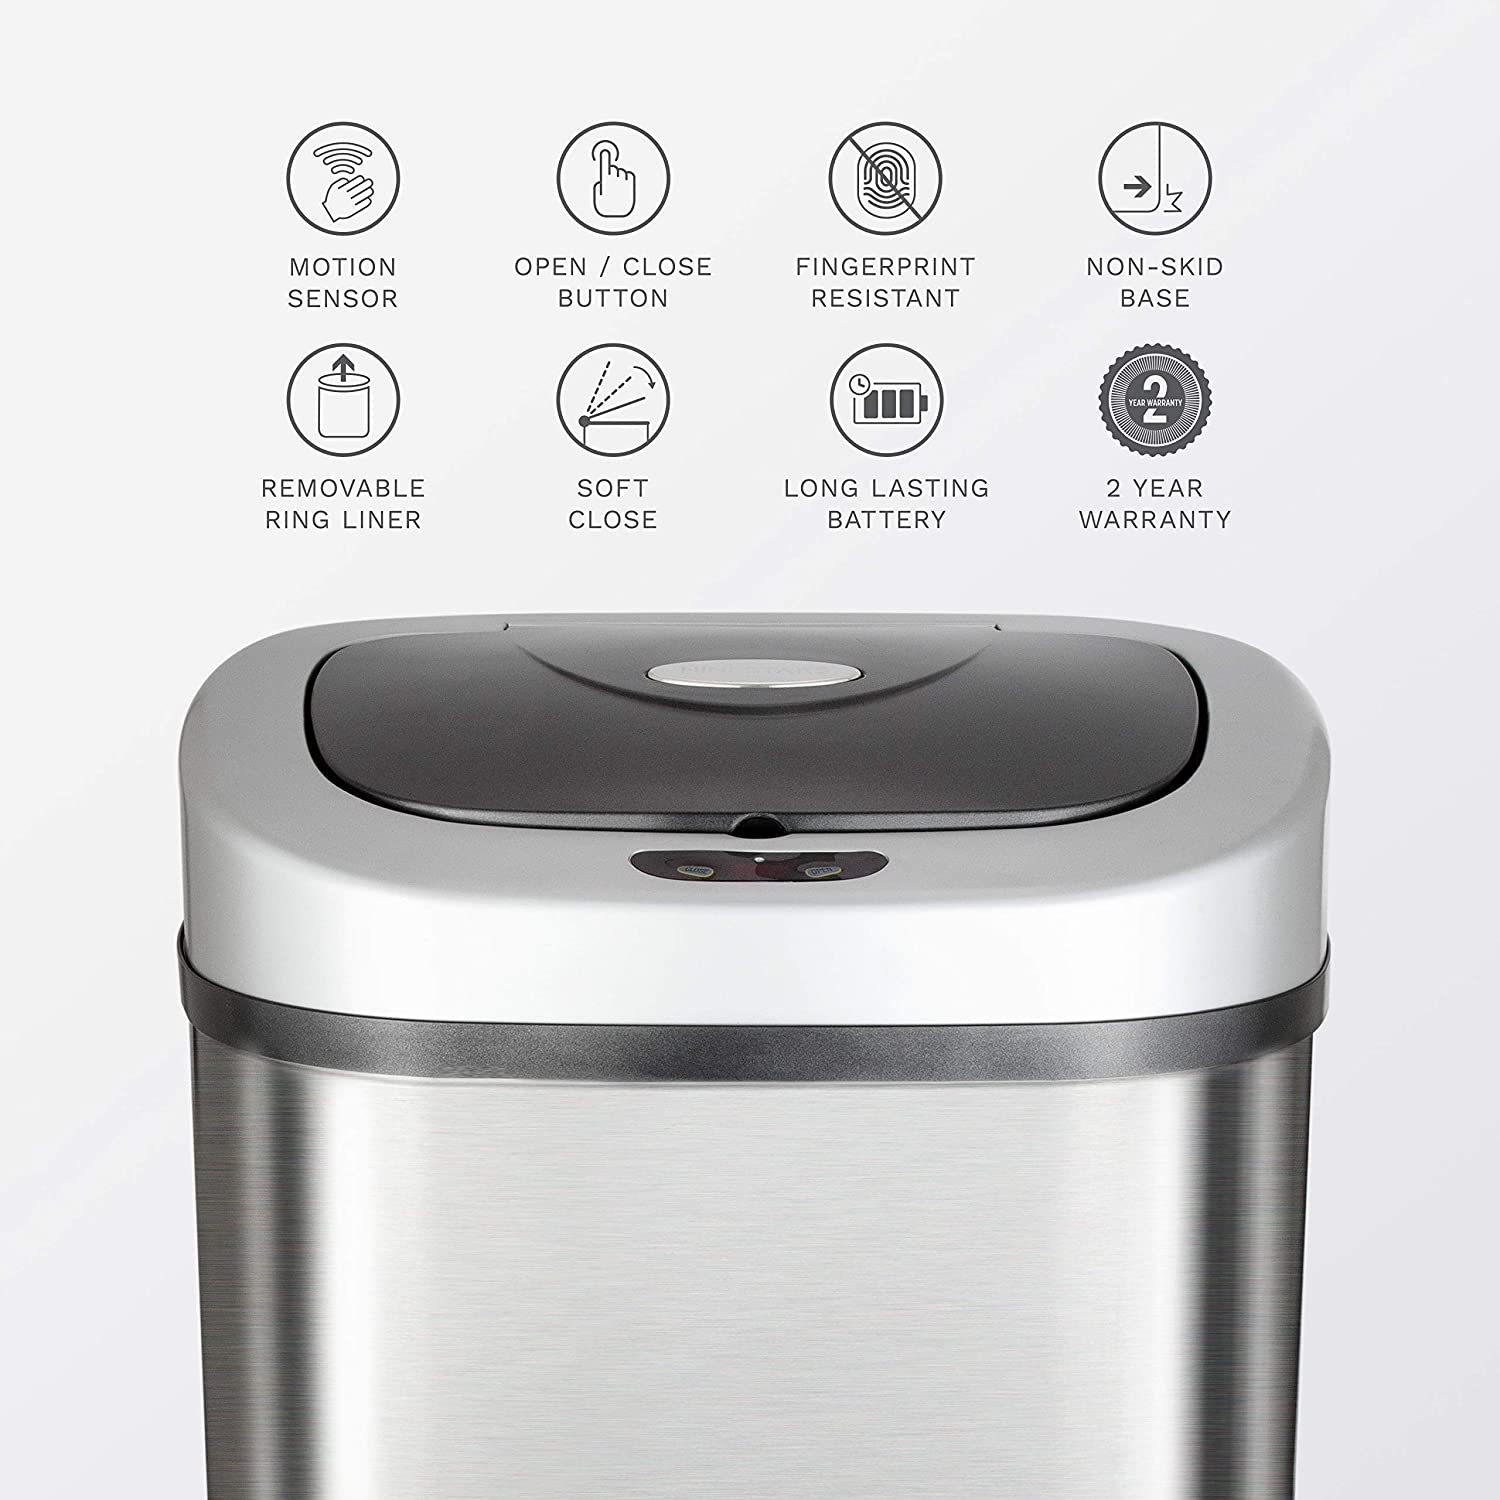 https://bigbigmart.com/wp-content/uploads/2023/05/NINESTARS-Automatic-Touchless-Infrared-Motion-Sensor-Trash-Can-with-Stainless-Steel-Base-Oval-Silver-Black-Lid-21-Gal5.jpg